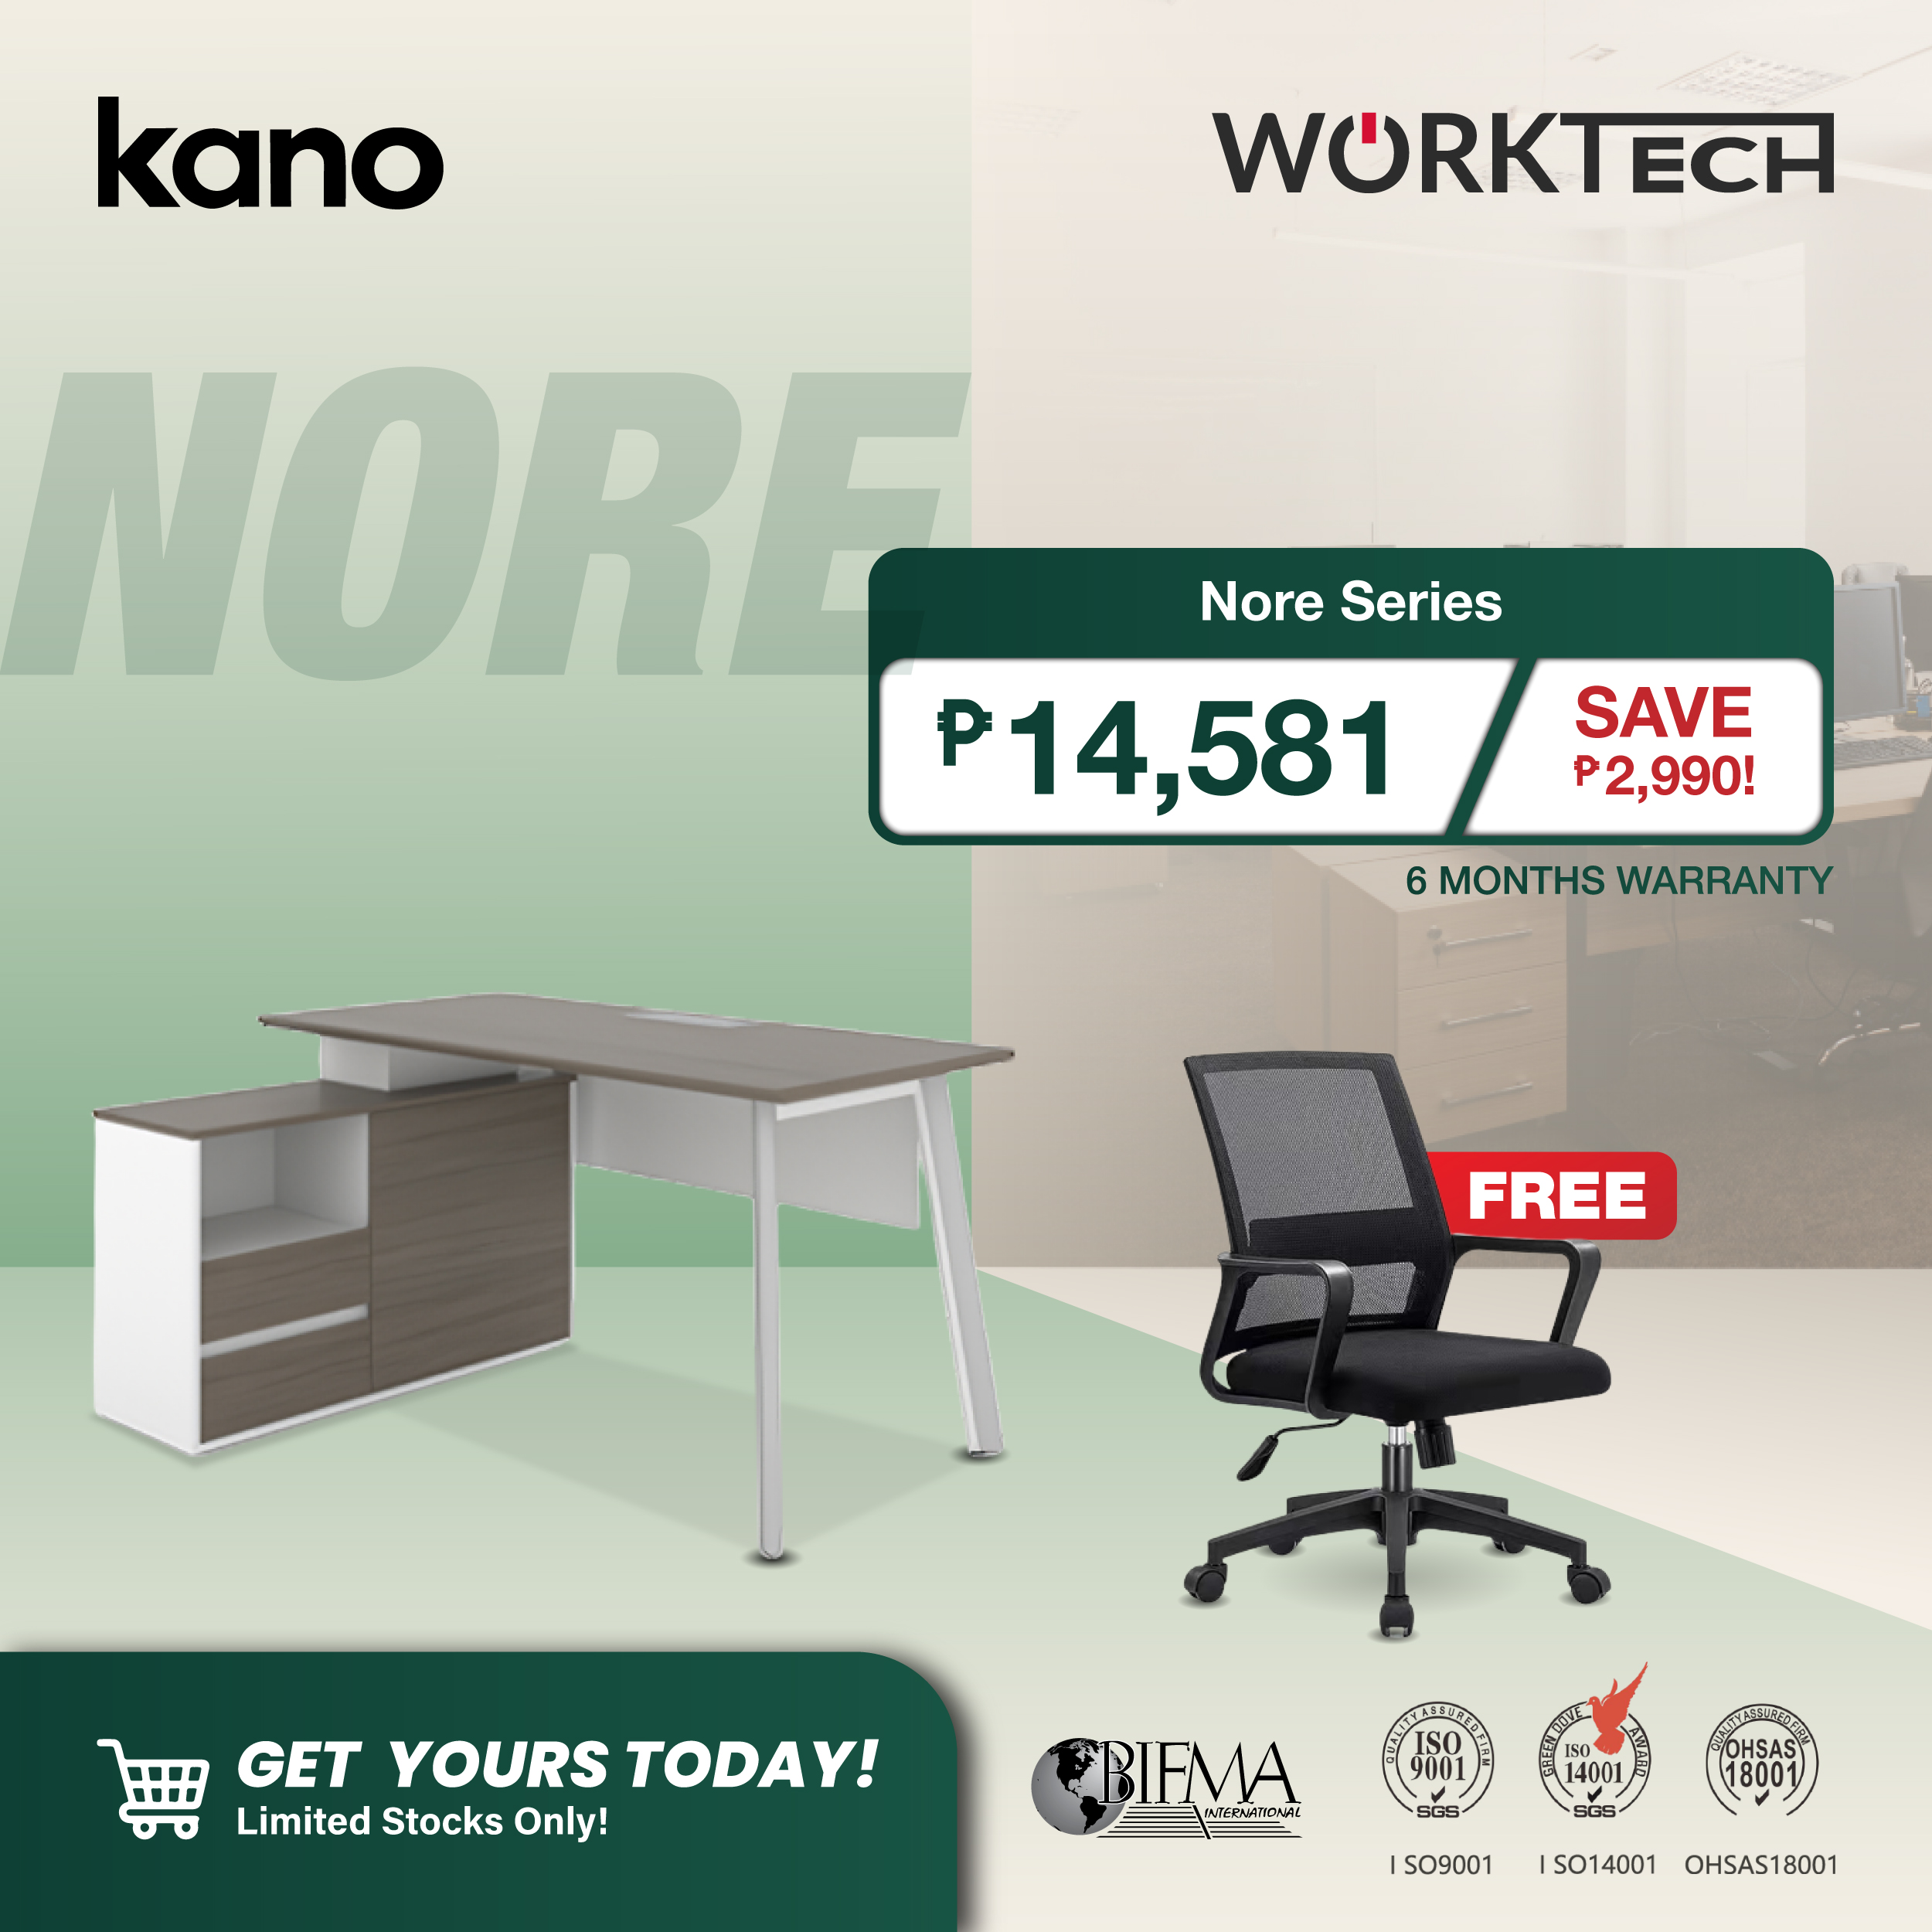 Kano Nore Series Workstation with FREE WorkTech Staff Chair